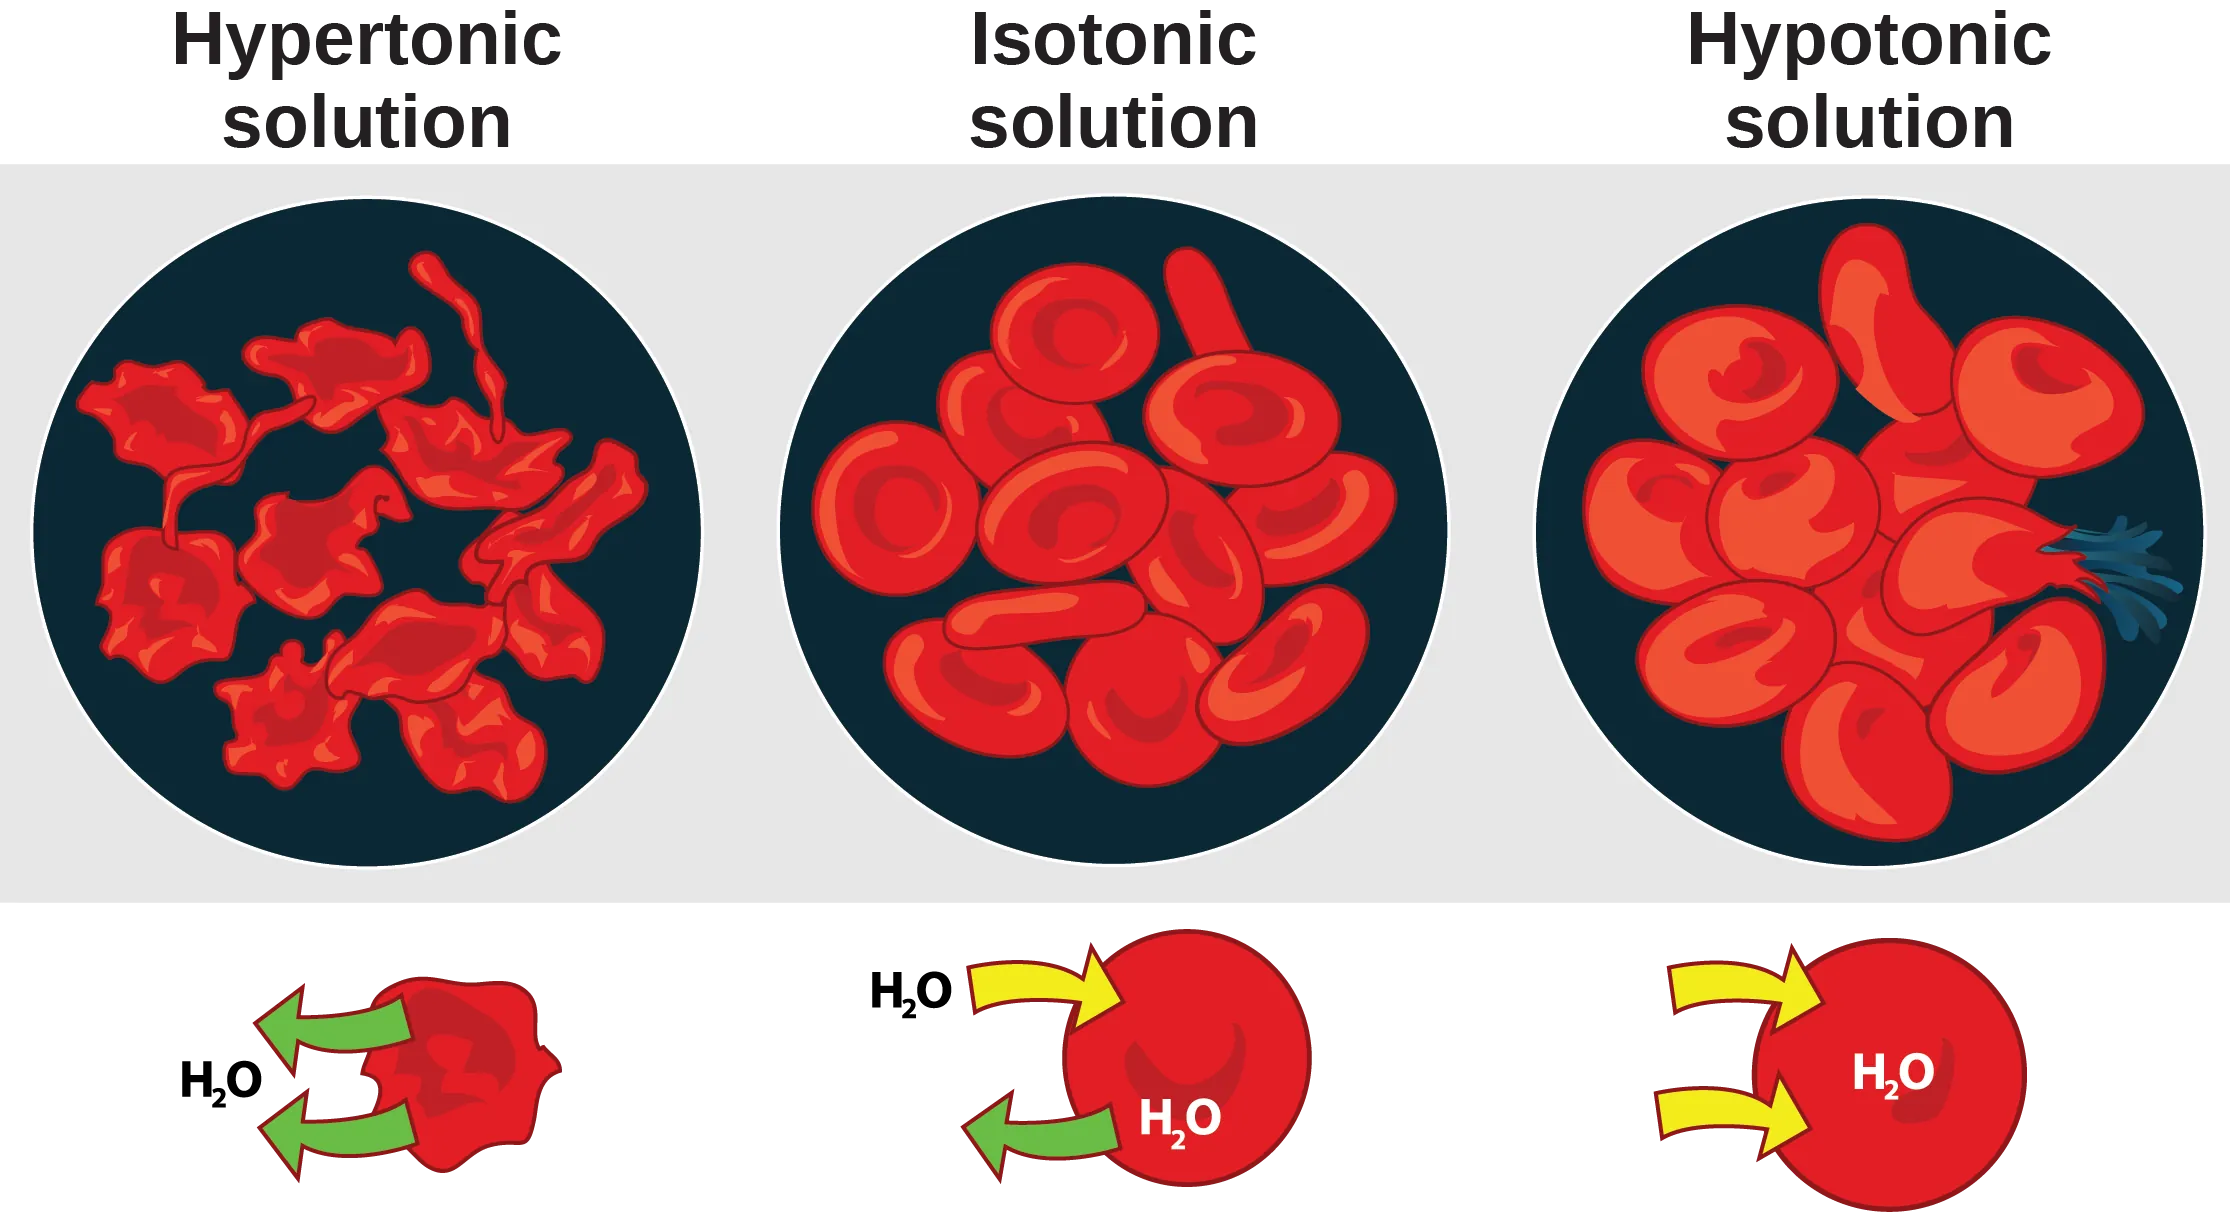 The left part of this illustration shows shriveled red blood cells bathed in a hypertonic solution. Below this, an diagram shows that upper case H subscript 2 baseline upper case O is leaving the red blood cell. The middle part shows healthy red blood cells bathed in an isotonic solution.  A diagram below this shows upper H subscript 2 baseline upper O both entering and exiting the cell.  And the right part shows bloated red blood cells bathed in a hypotonic solution. One of the bloated cells in the hypotonic solution bursts. A diagram below this shows upper H subscript 2 baseline upper O enterning the cell.